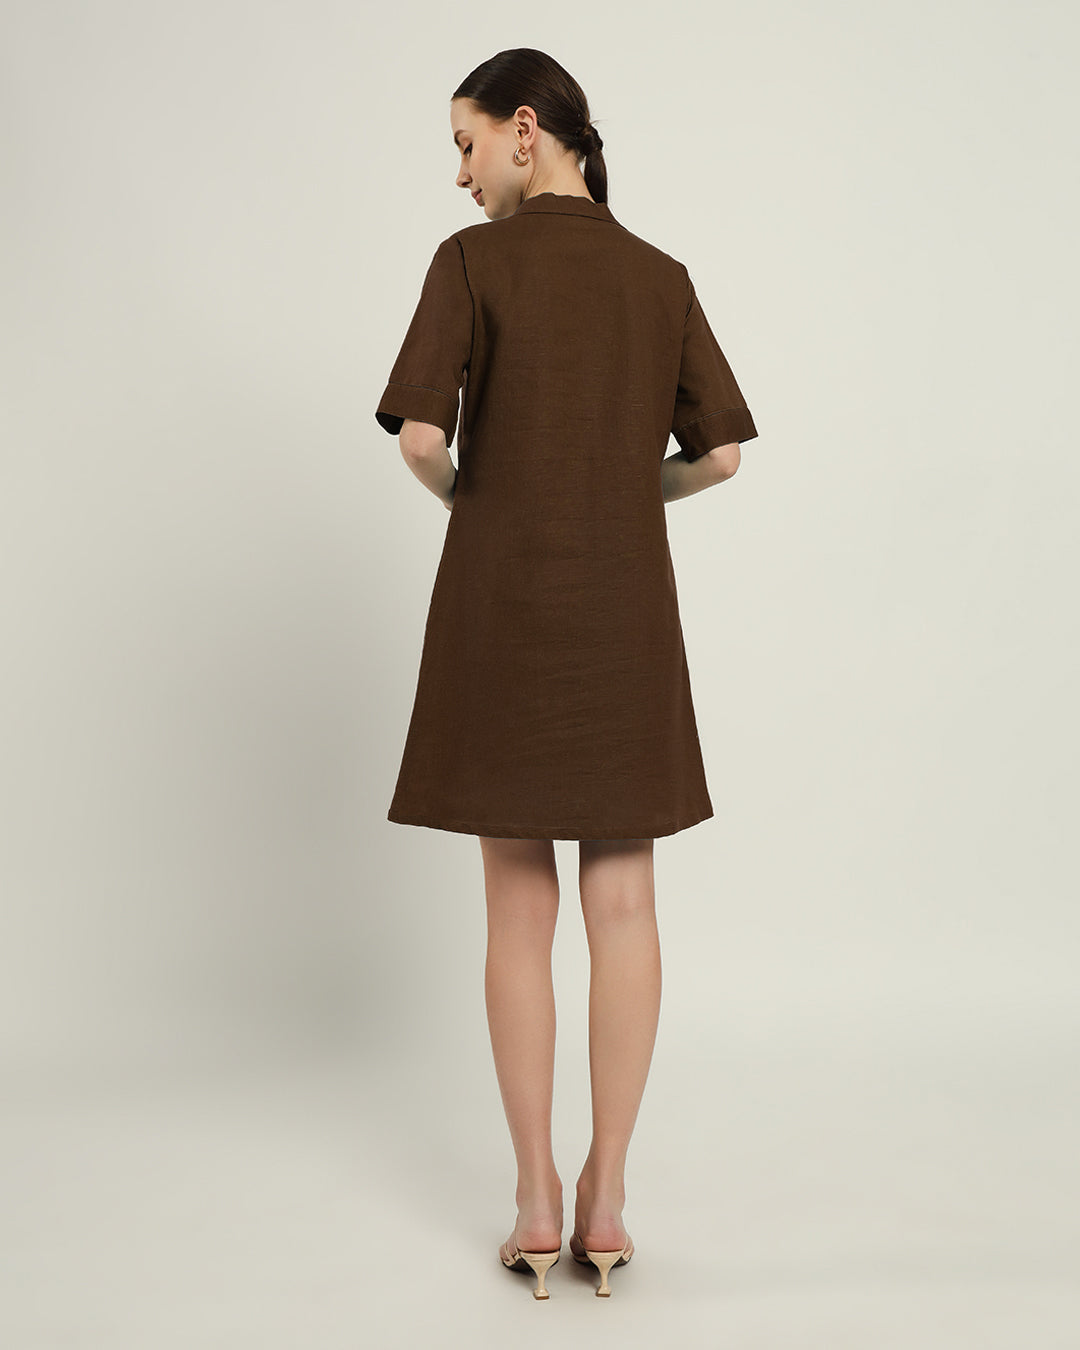 The Ermont Nutshell Dress